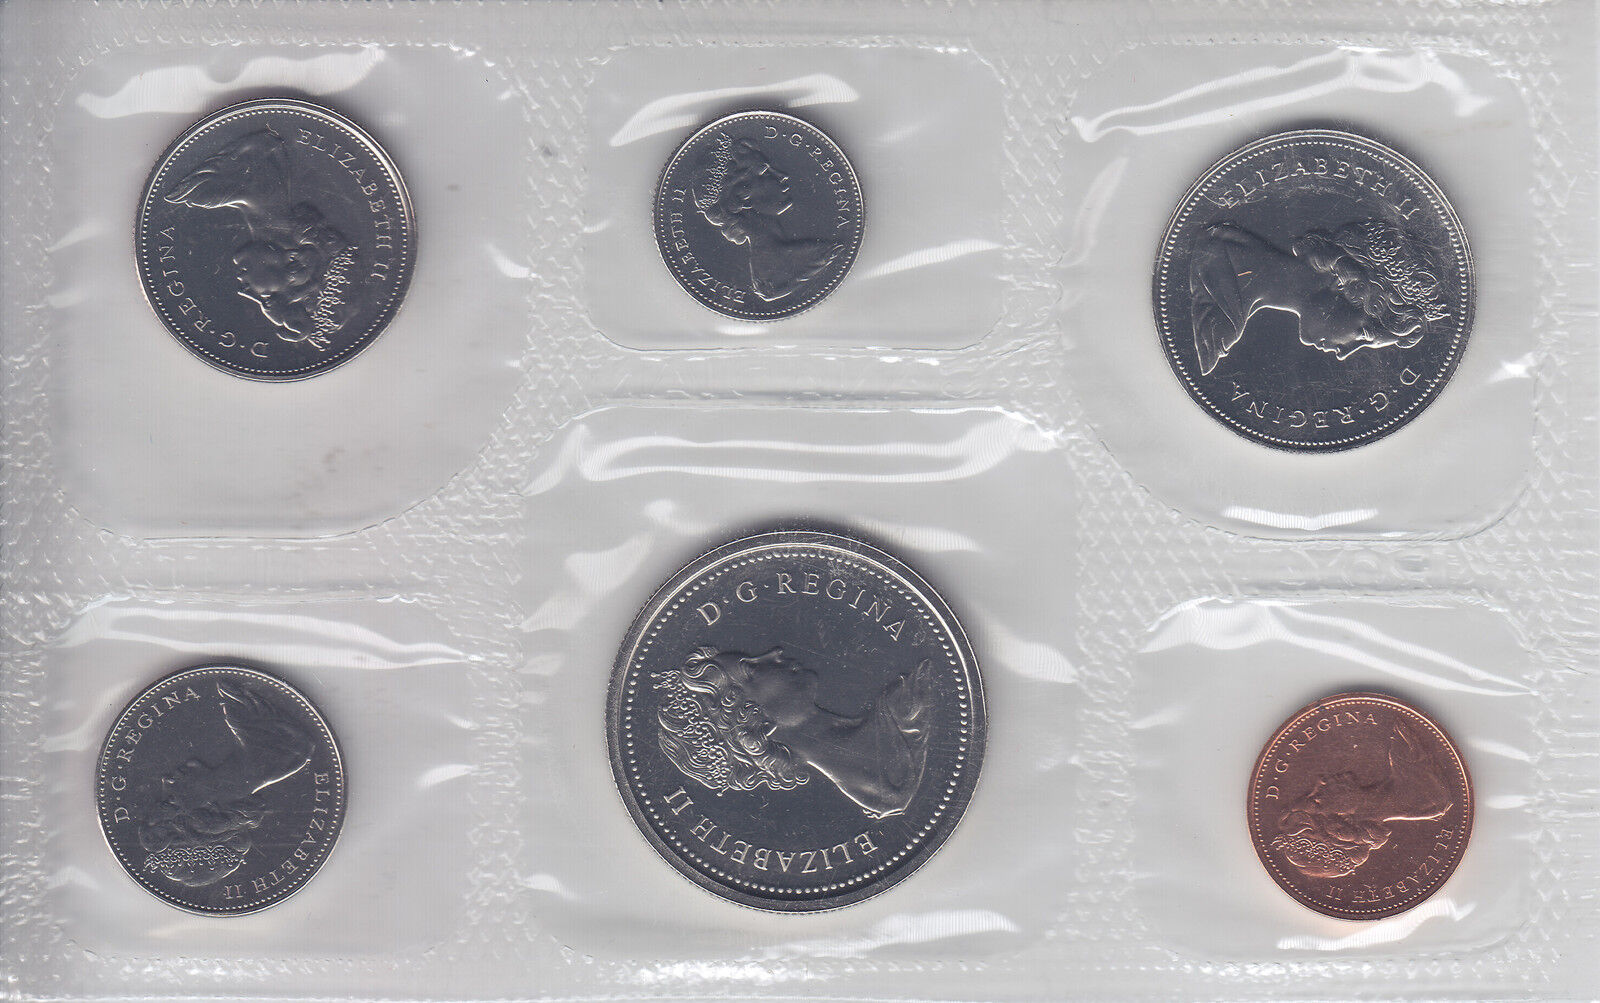 1976 Canada Proof Like (PL) Set - Royal Canadian Mint Uncirculated Issue